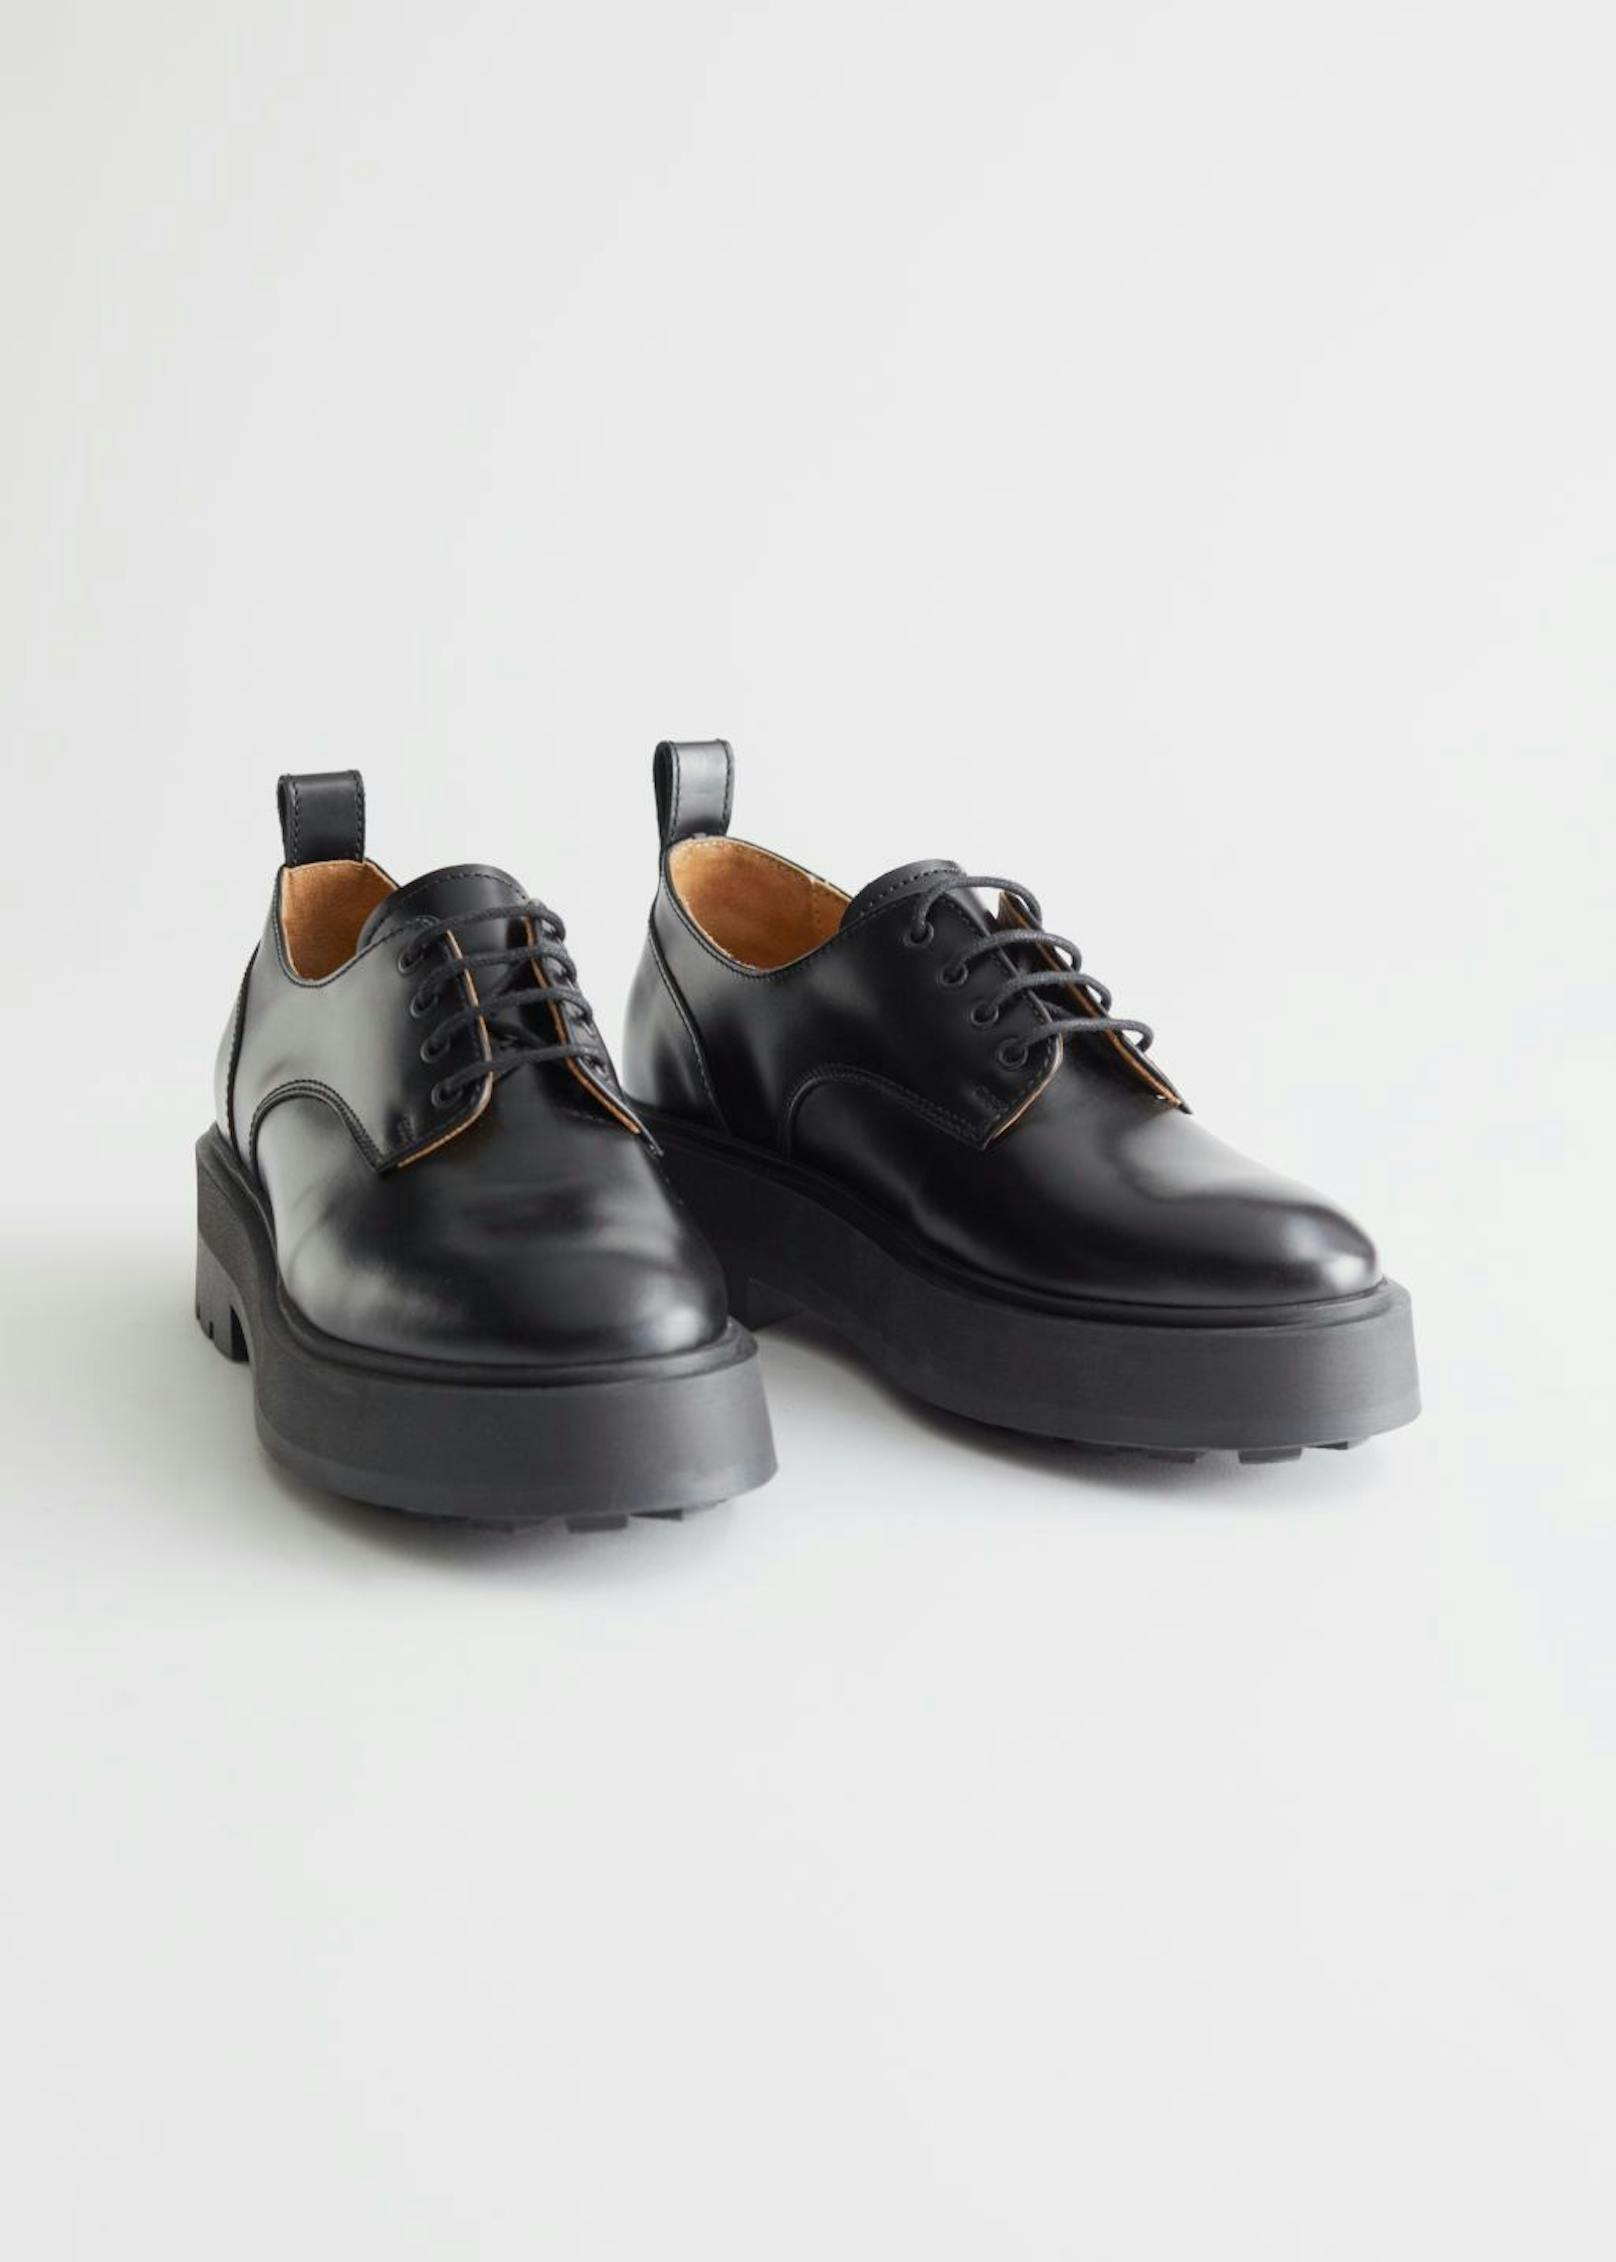 Chunky Leather Oxfords von <a href="https://www.stories.com/en_eur/shoes/flats/loafers/product.chunky-leather-oxfords-black.0910102001.html">&amp; Other Stories</a> um 129 Euro.